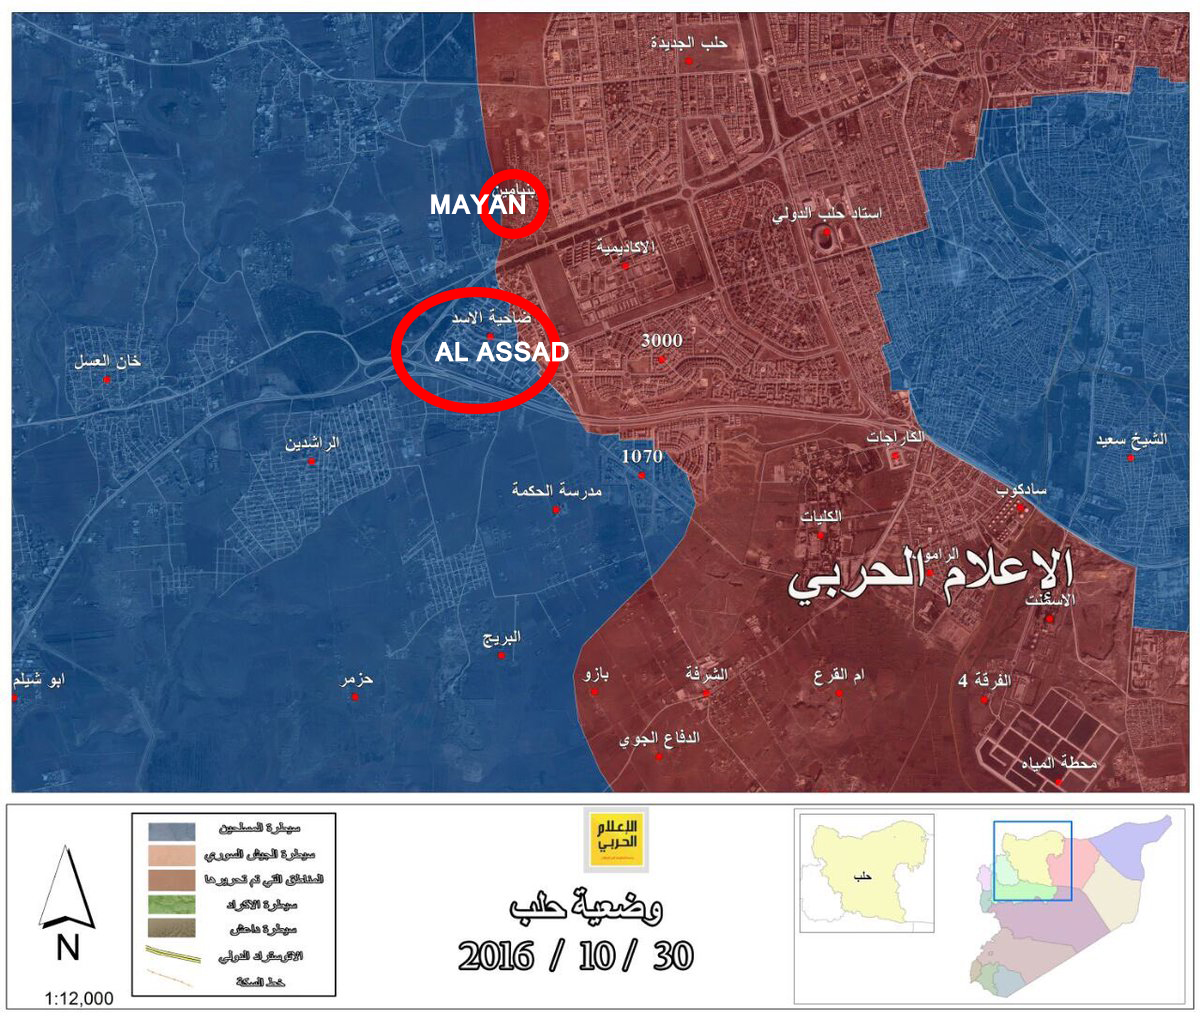 Overview of Military Situation in Aleppo City on October 31, 2016